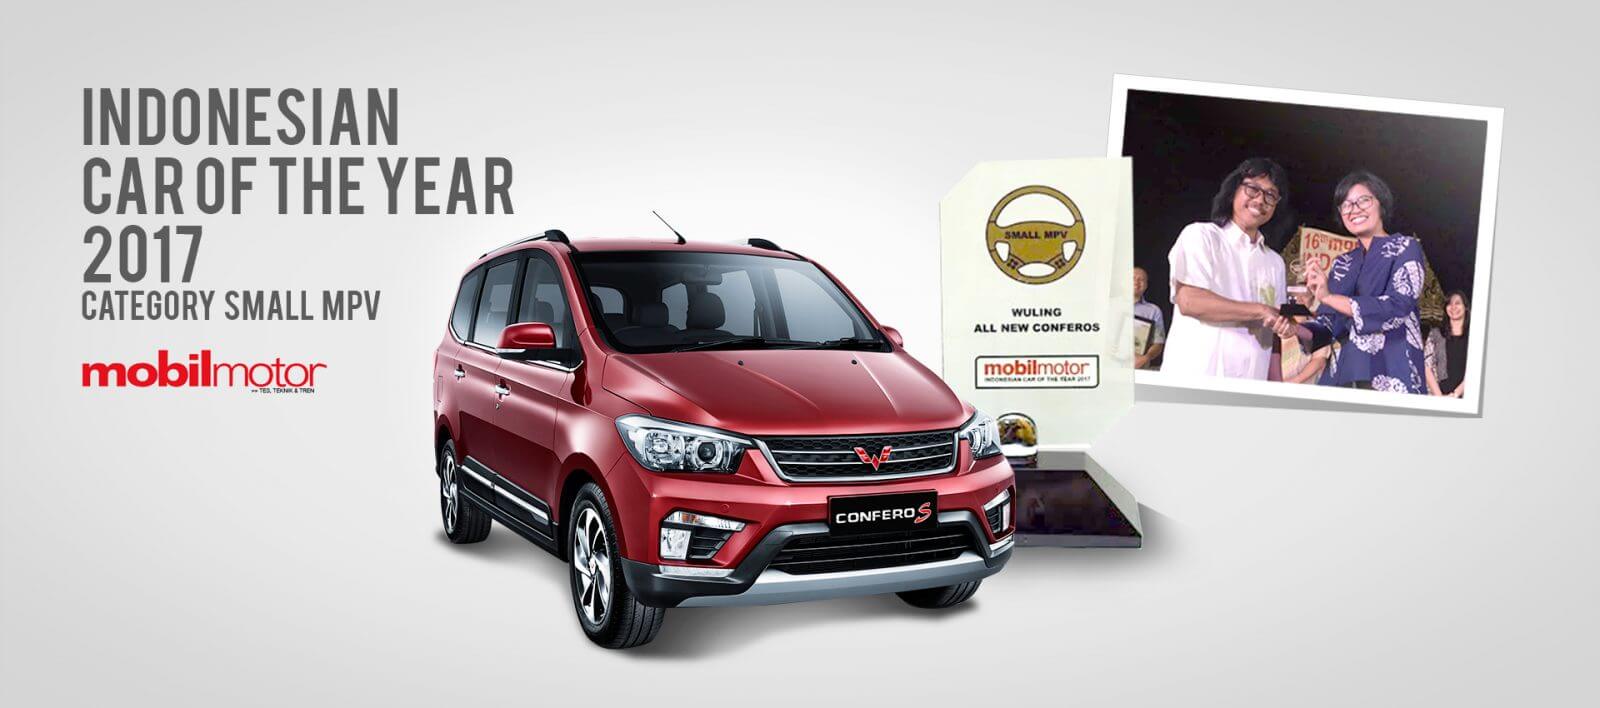 Image Wuling Confero S Has Won Small MPV Category in ICOTY 2017